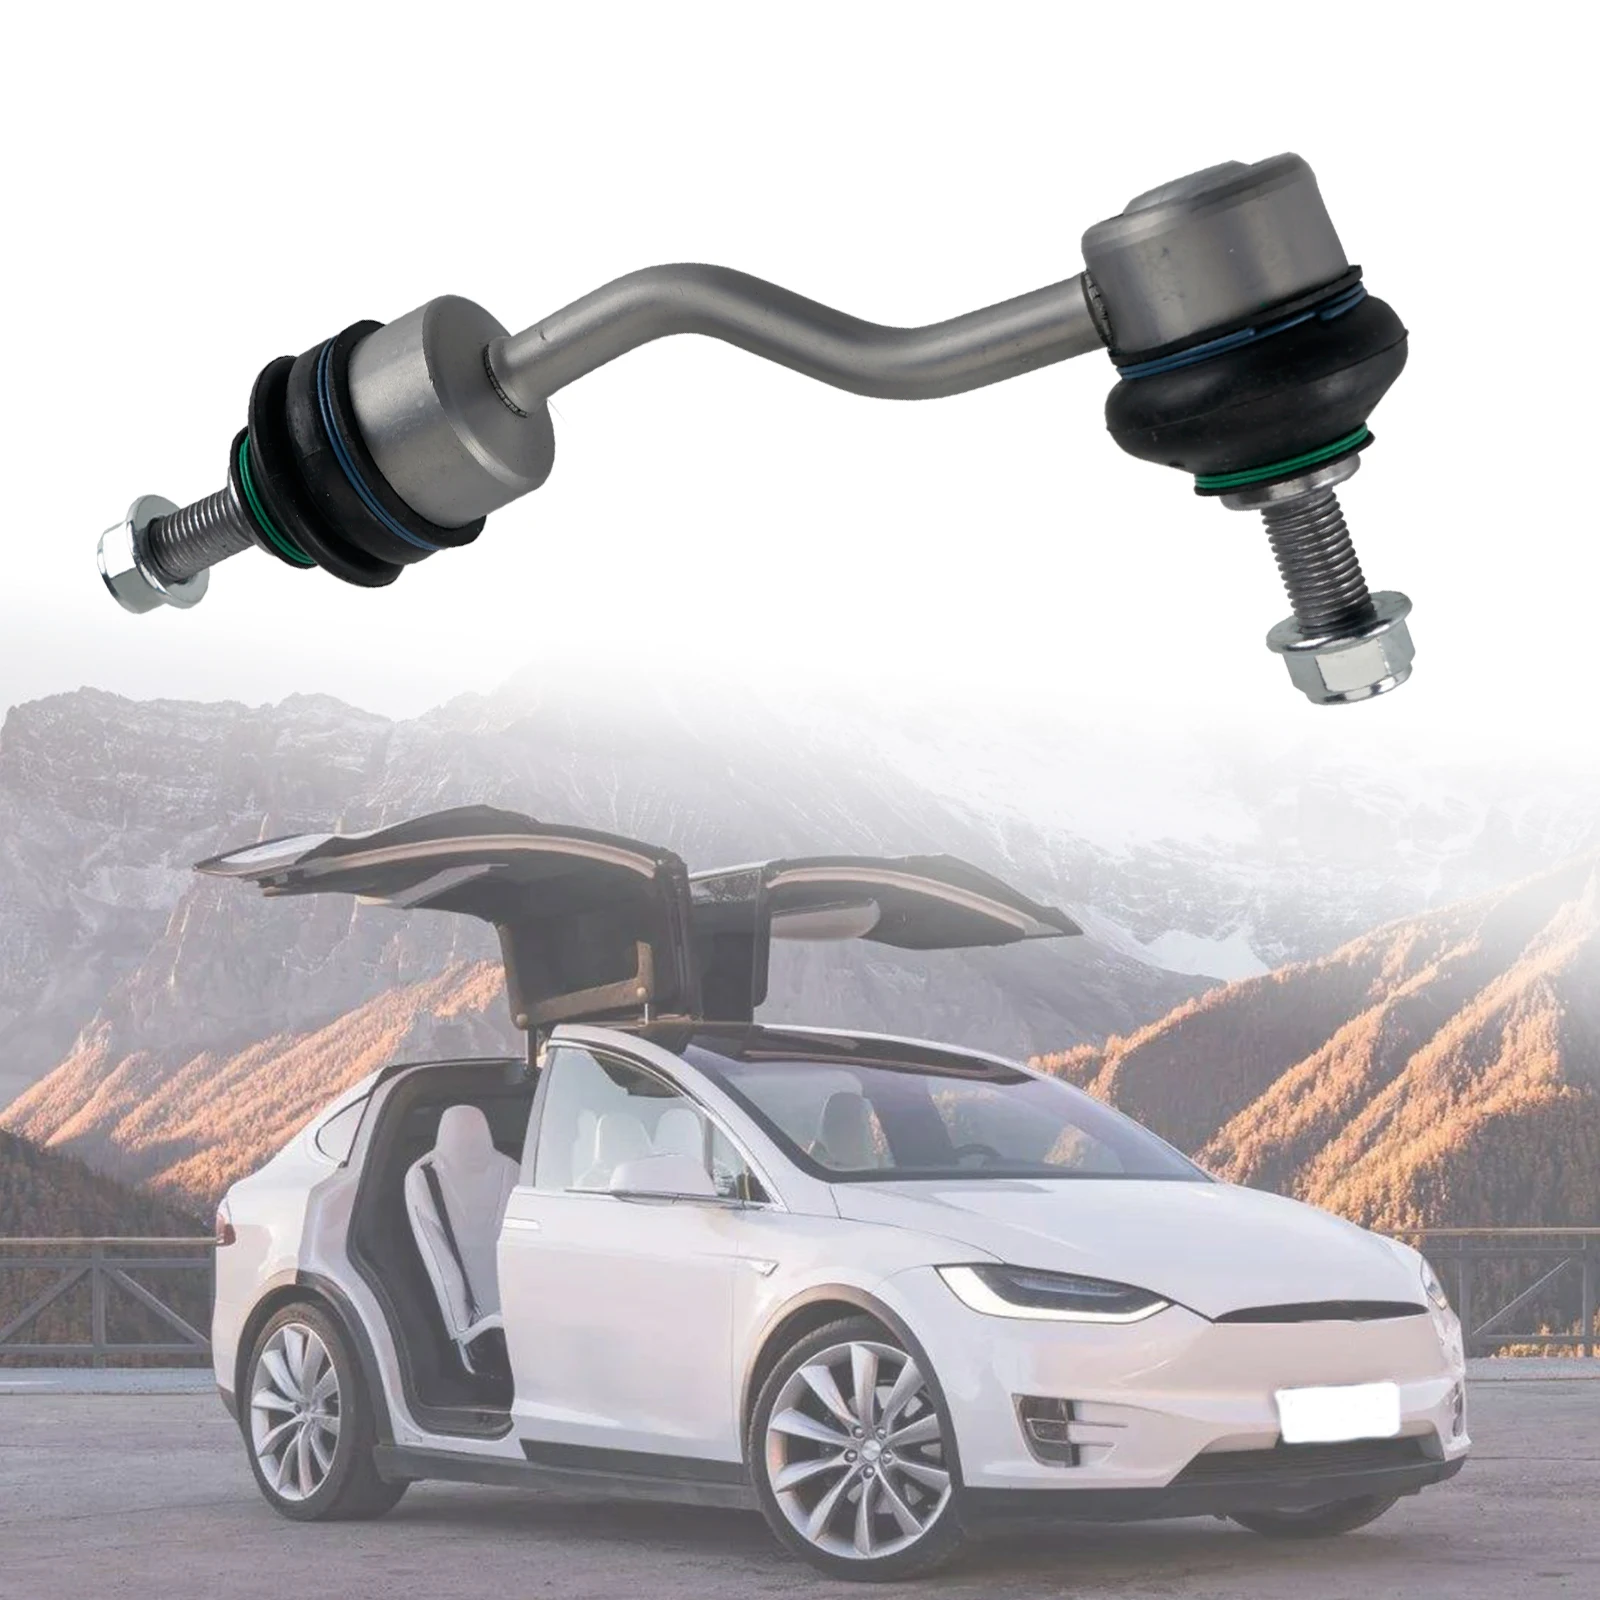 

New Arrival Rear Stabilizer Left/Right Car Special Accessory For Tesla Model X L=R OE 1027491-00-A